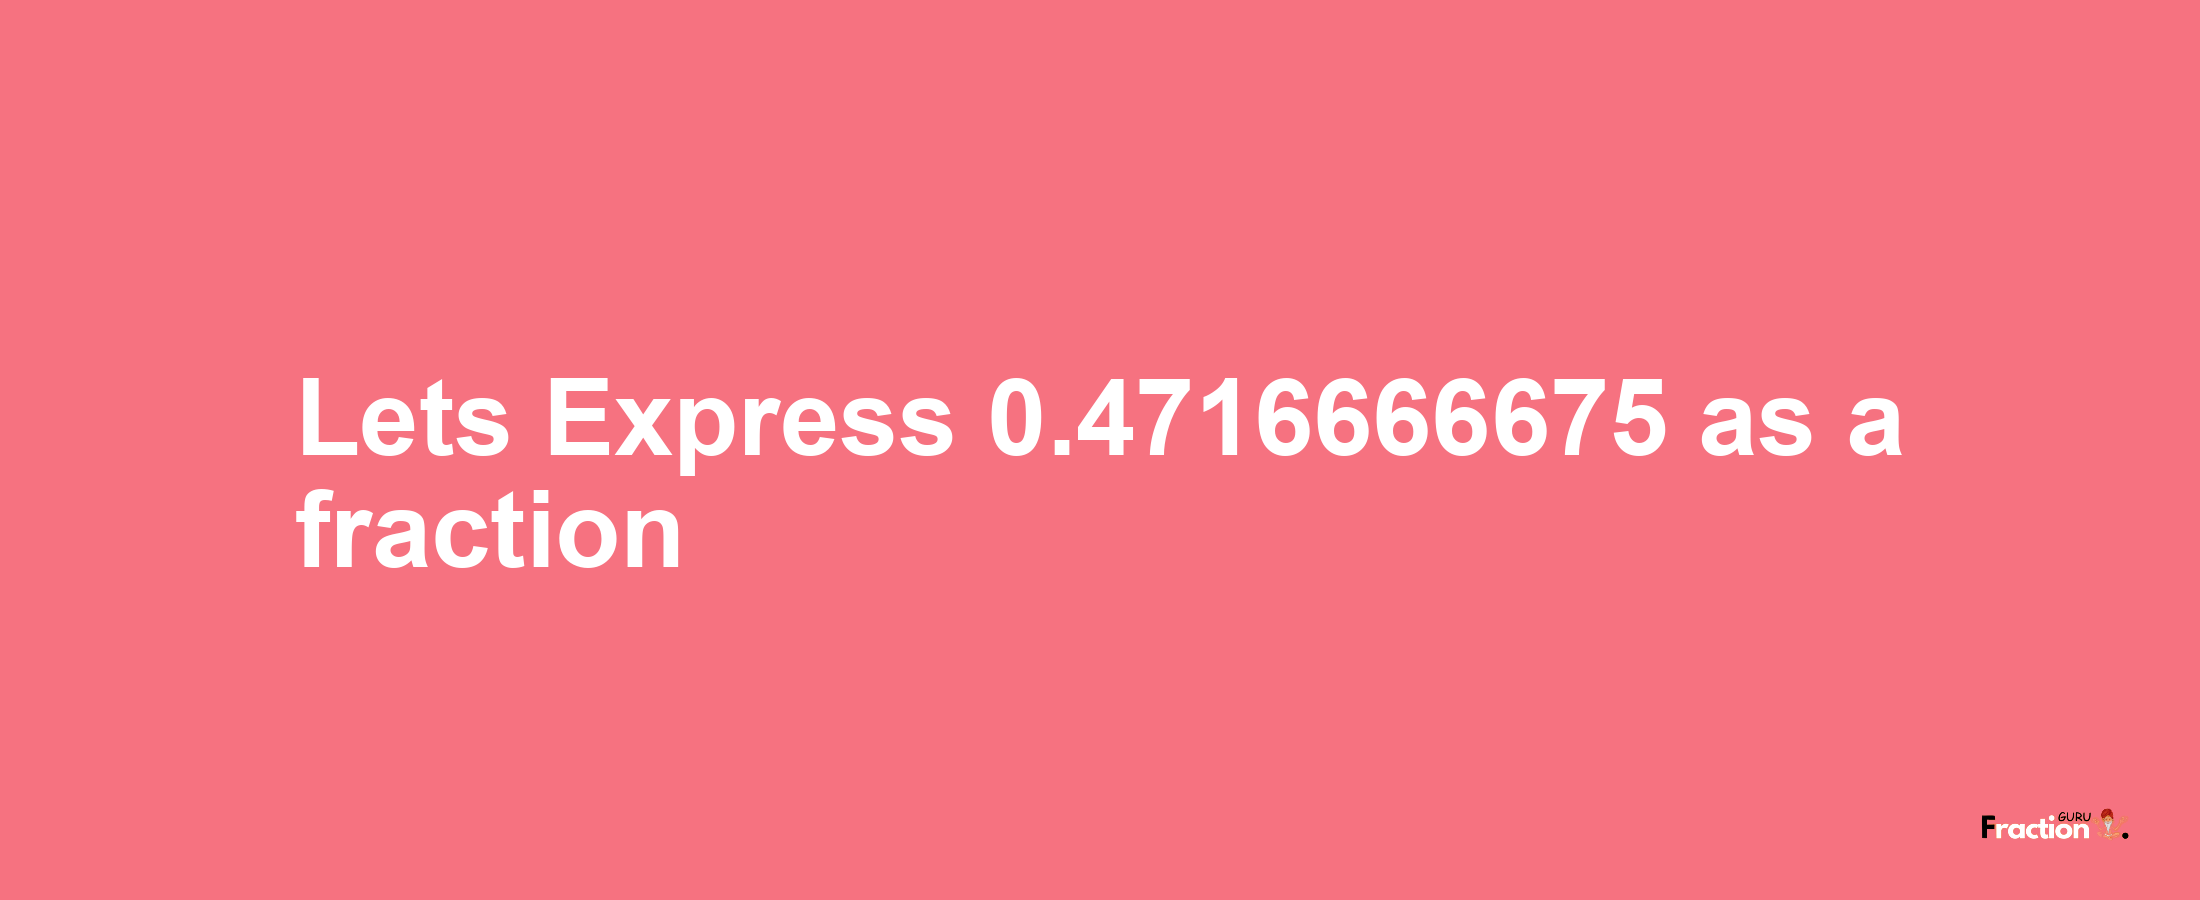 Lets Express 0.4716666675 as afraction